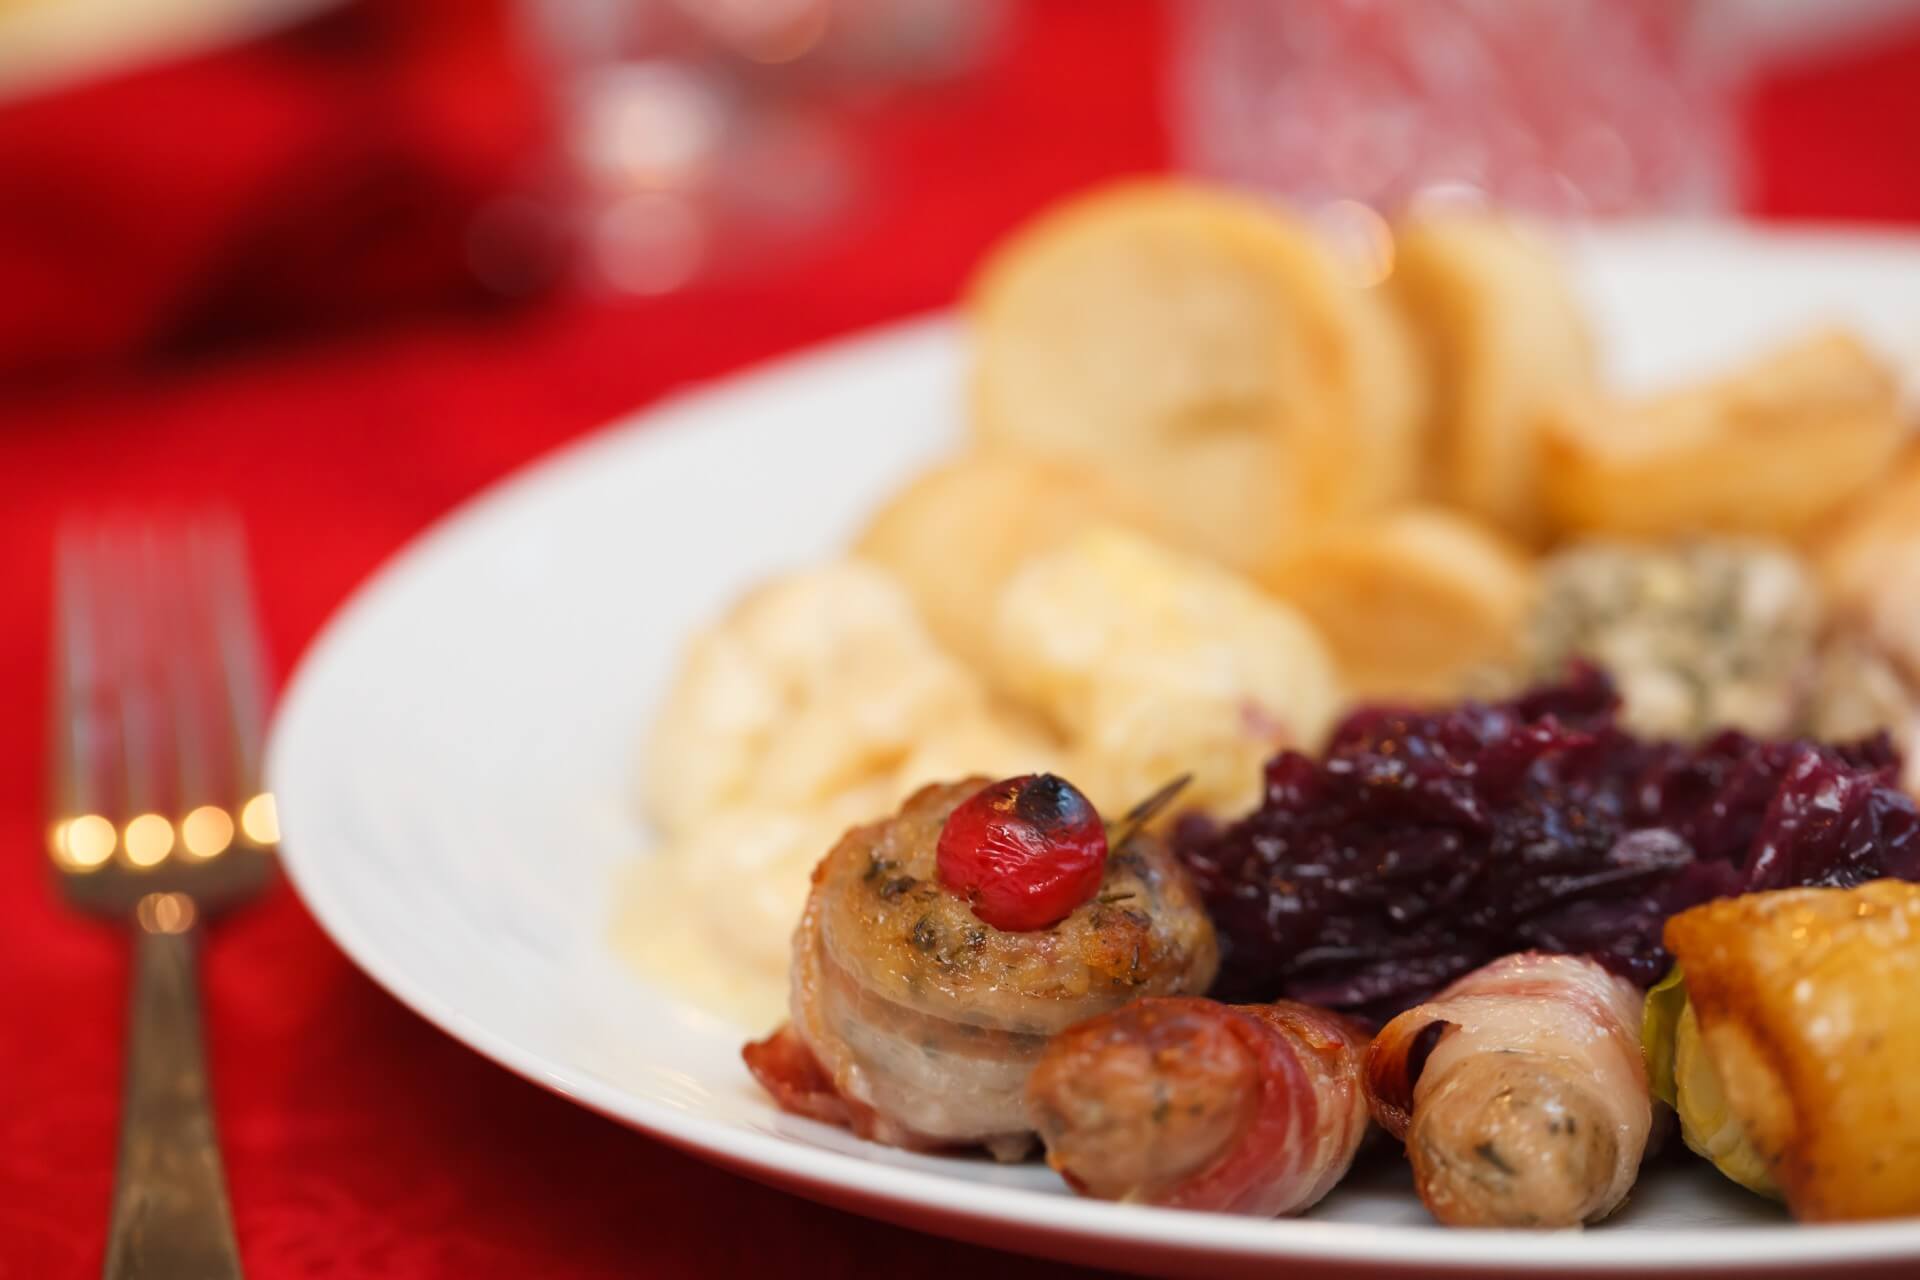 New study finds Irish adults will spend 31% more on food this Christmas compared to last year